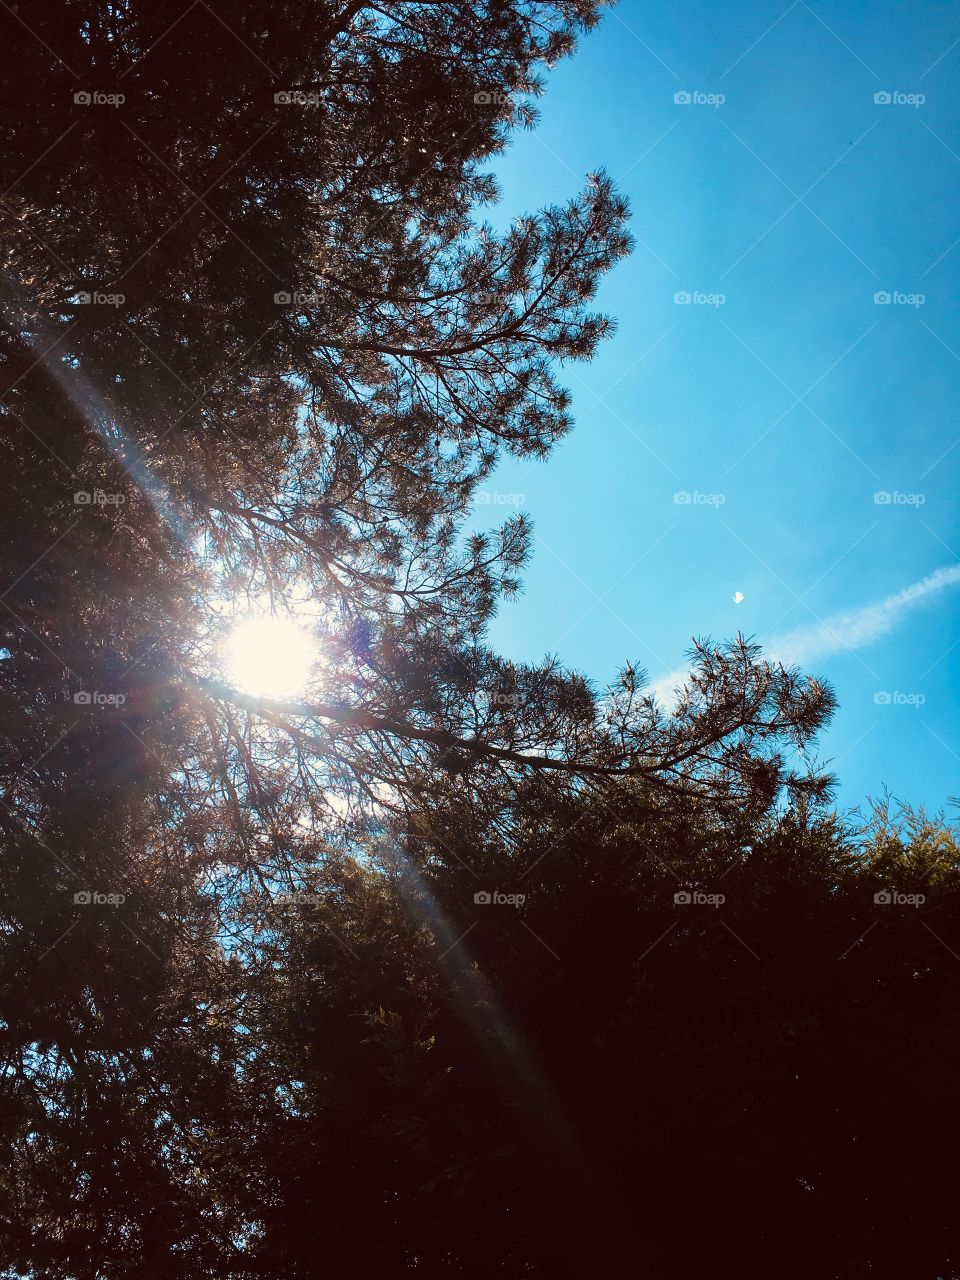 Sun shining through the pine trees and leylandii with plane jet stream across the blue sky in the background 